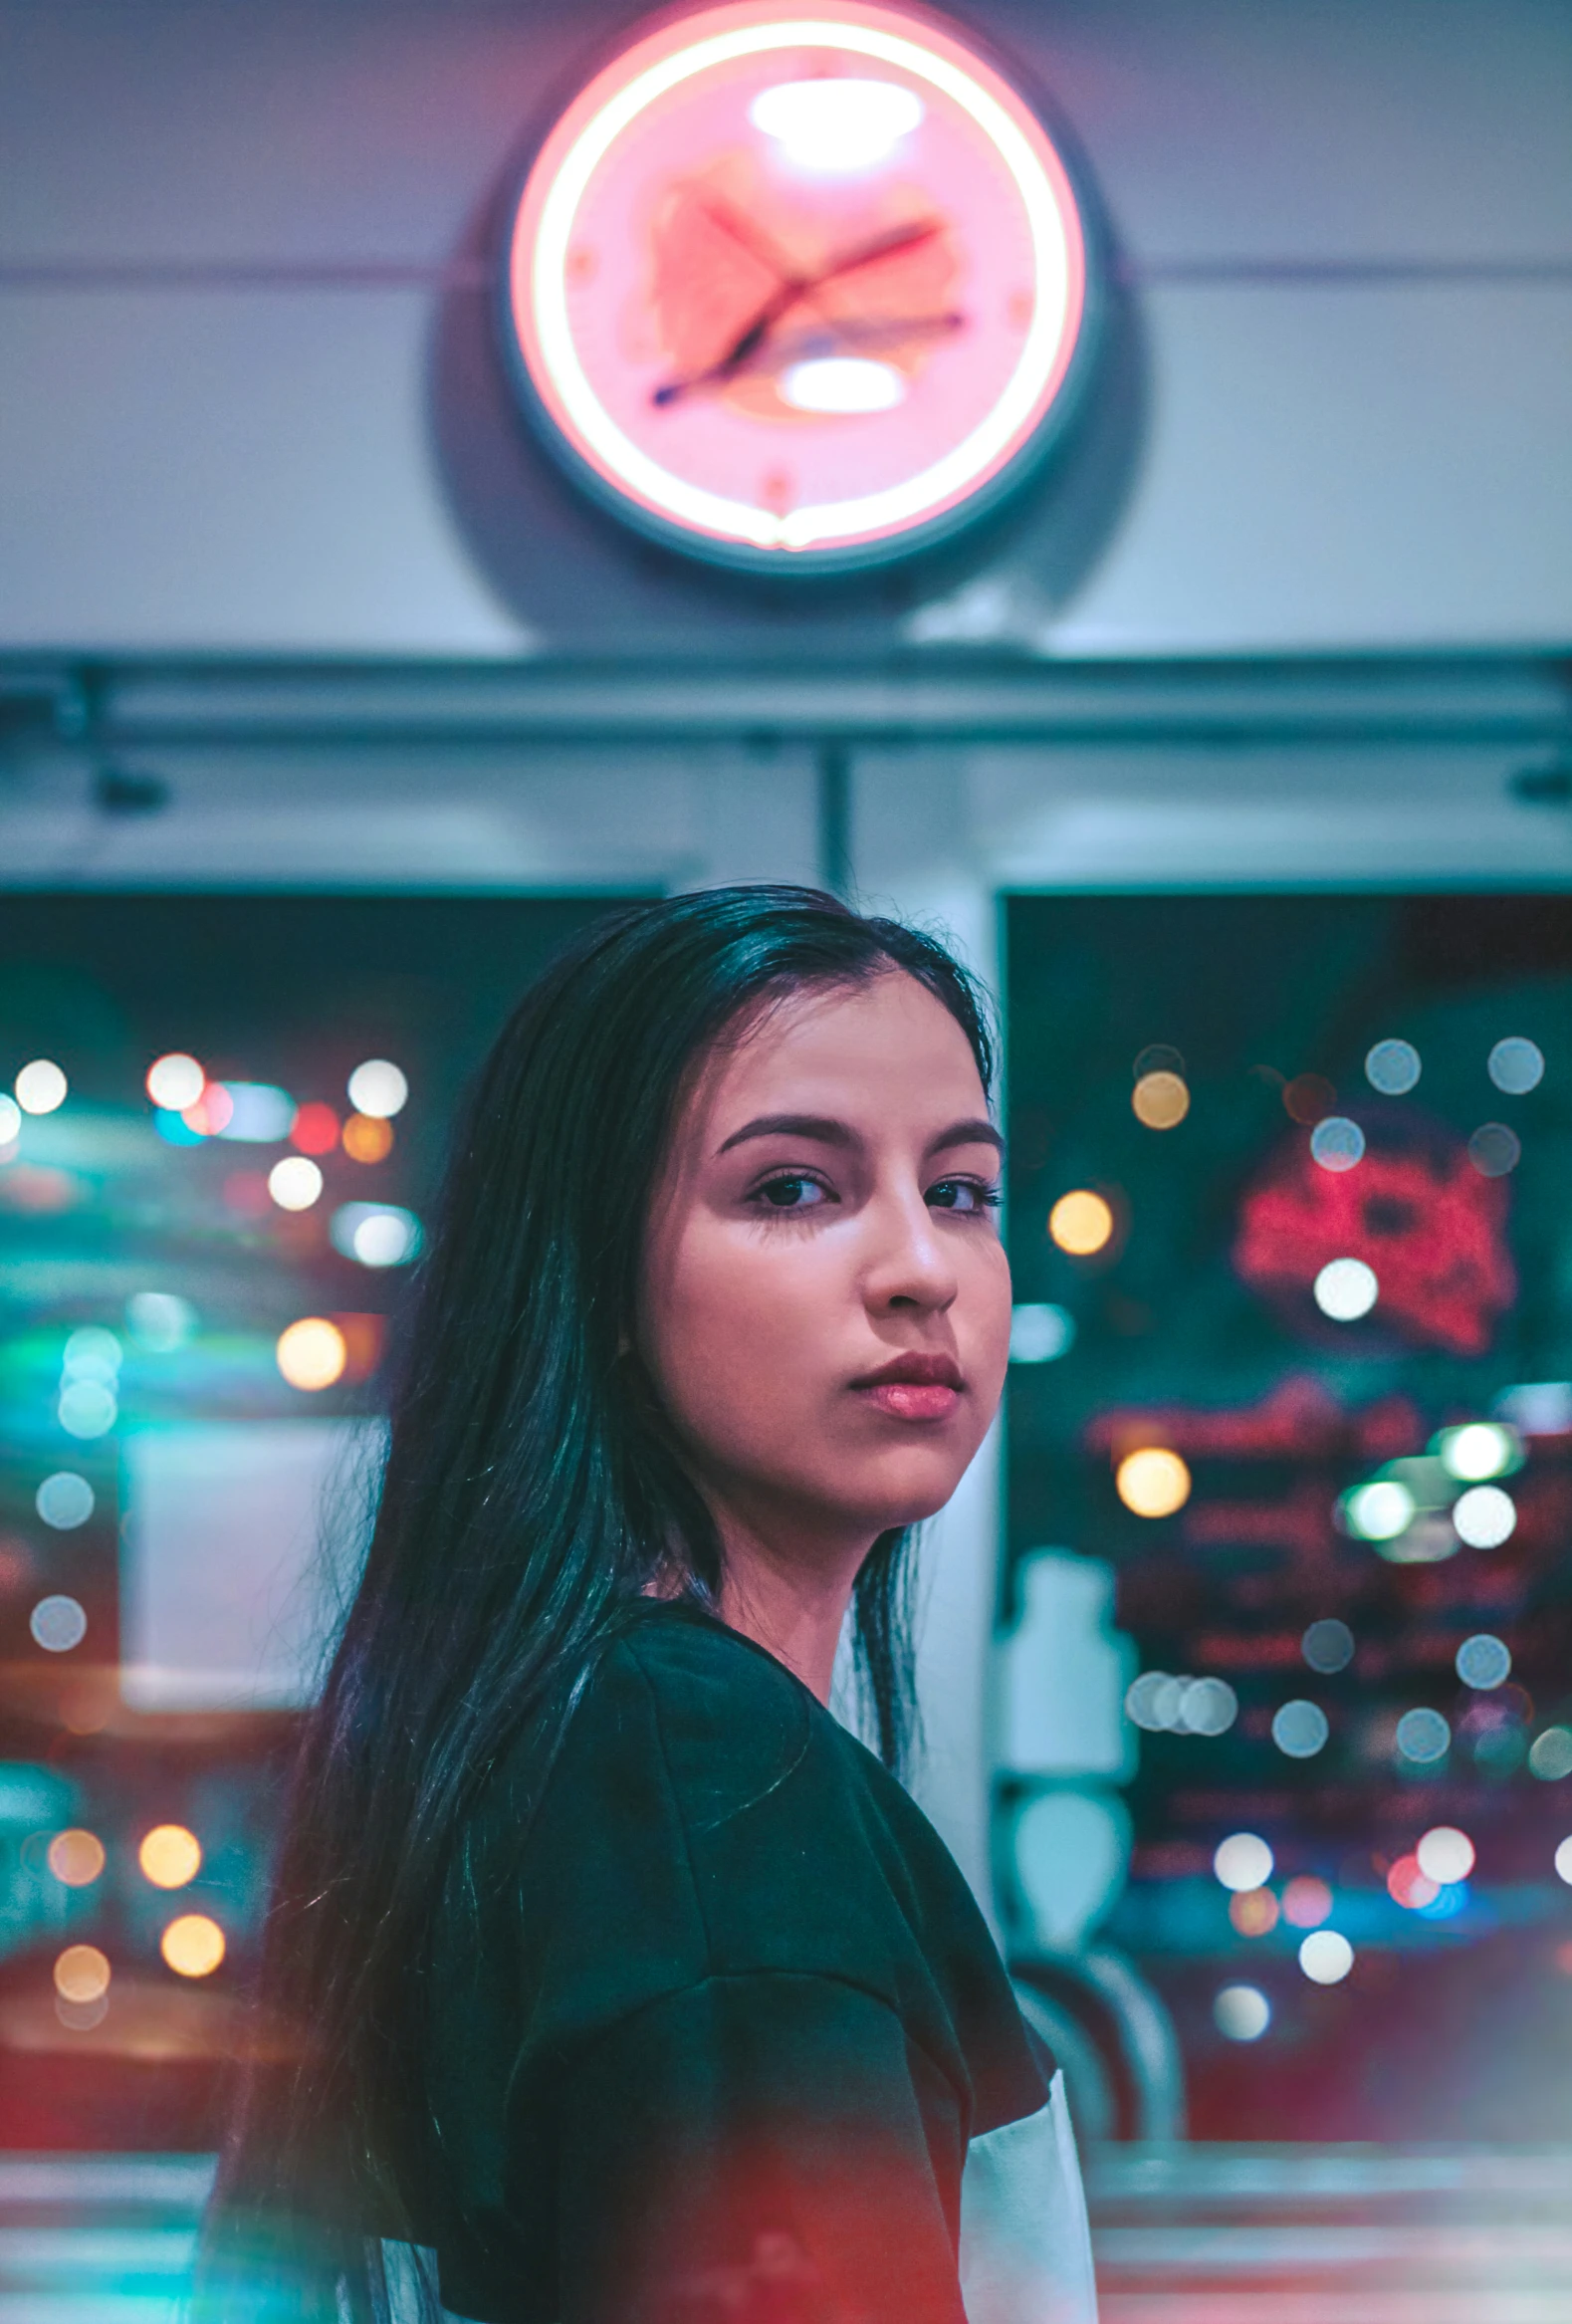 young lady in front of a lighted clock, lit neon light up buildings